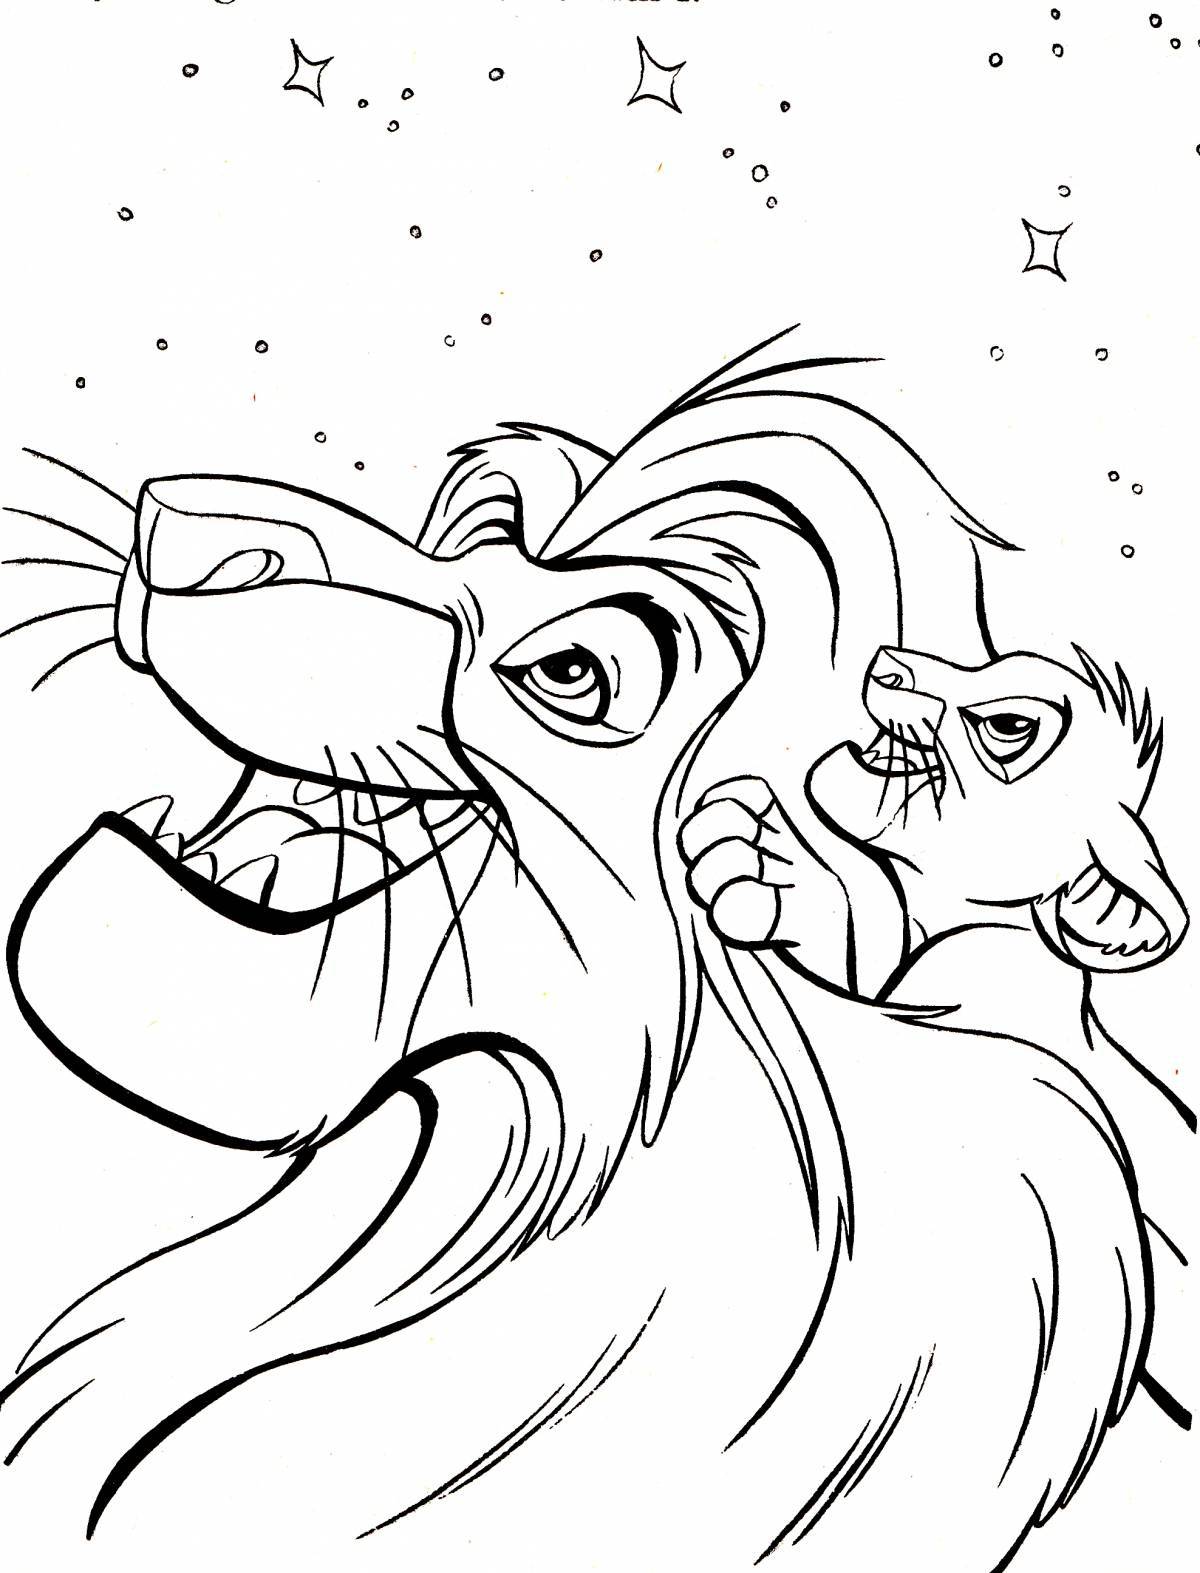 Coloring book the greatness of the lion king